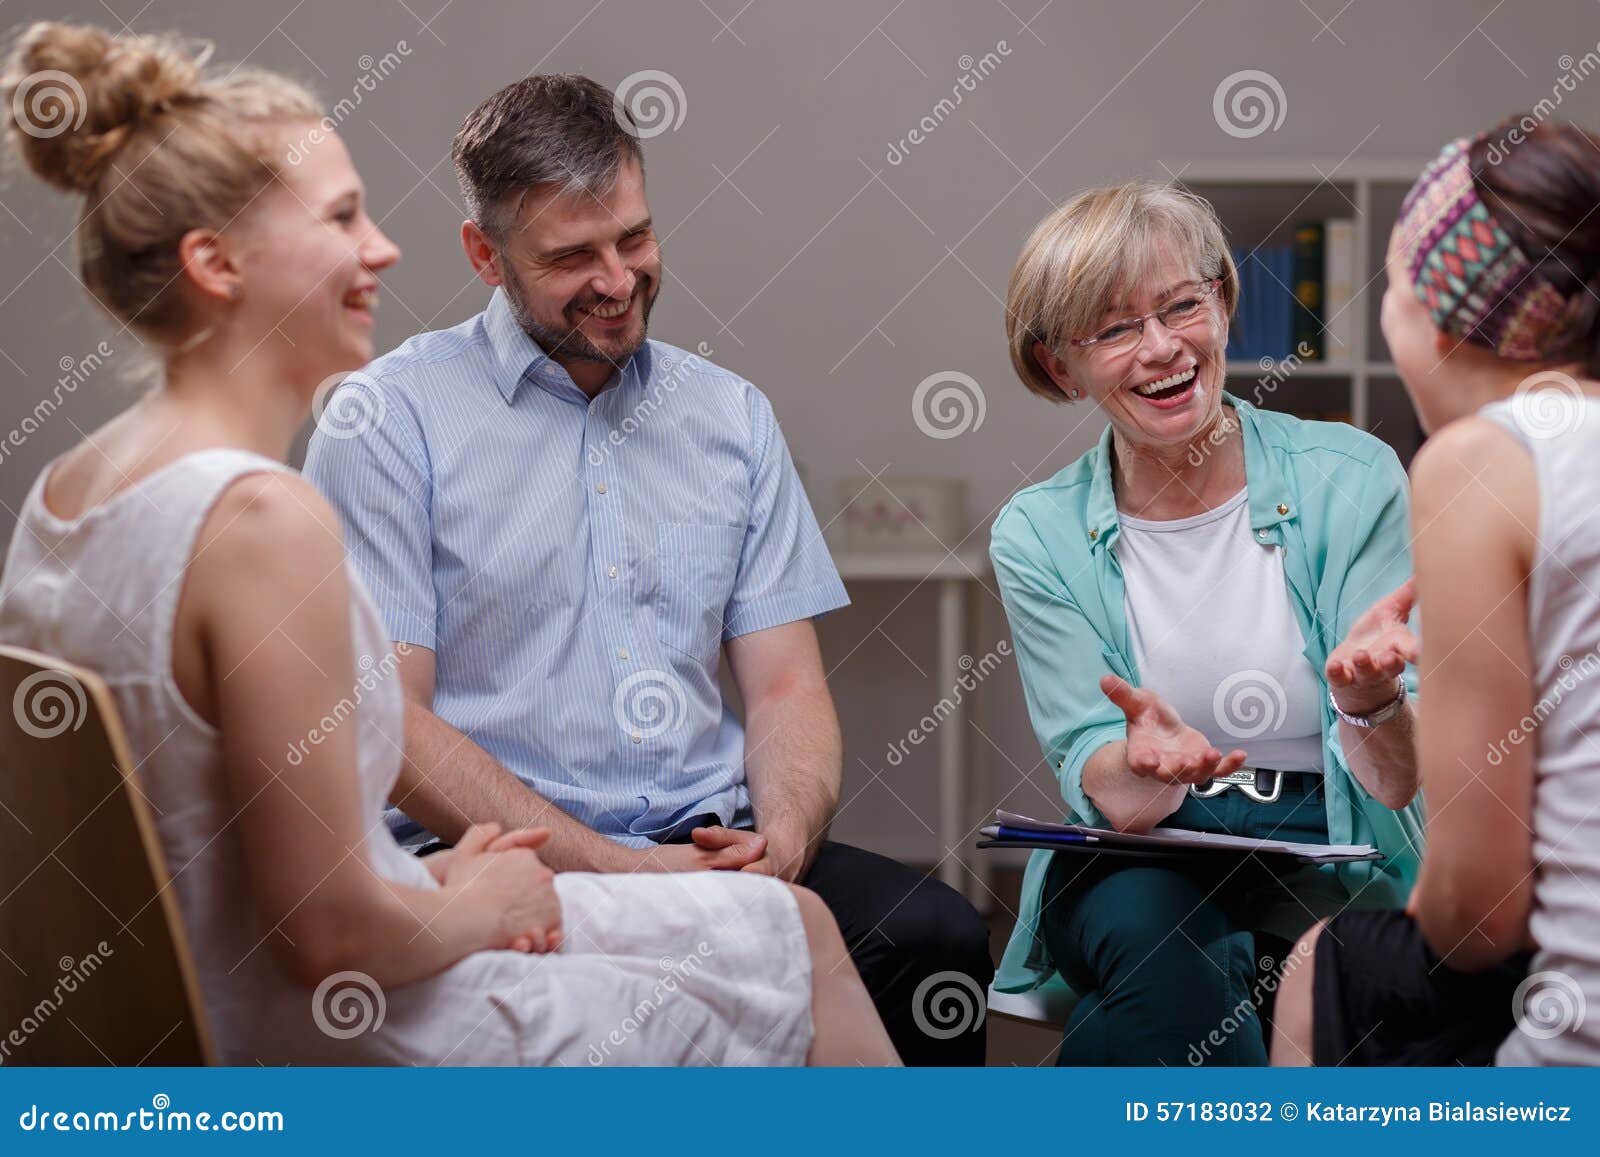 group during meeting with therapist